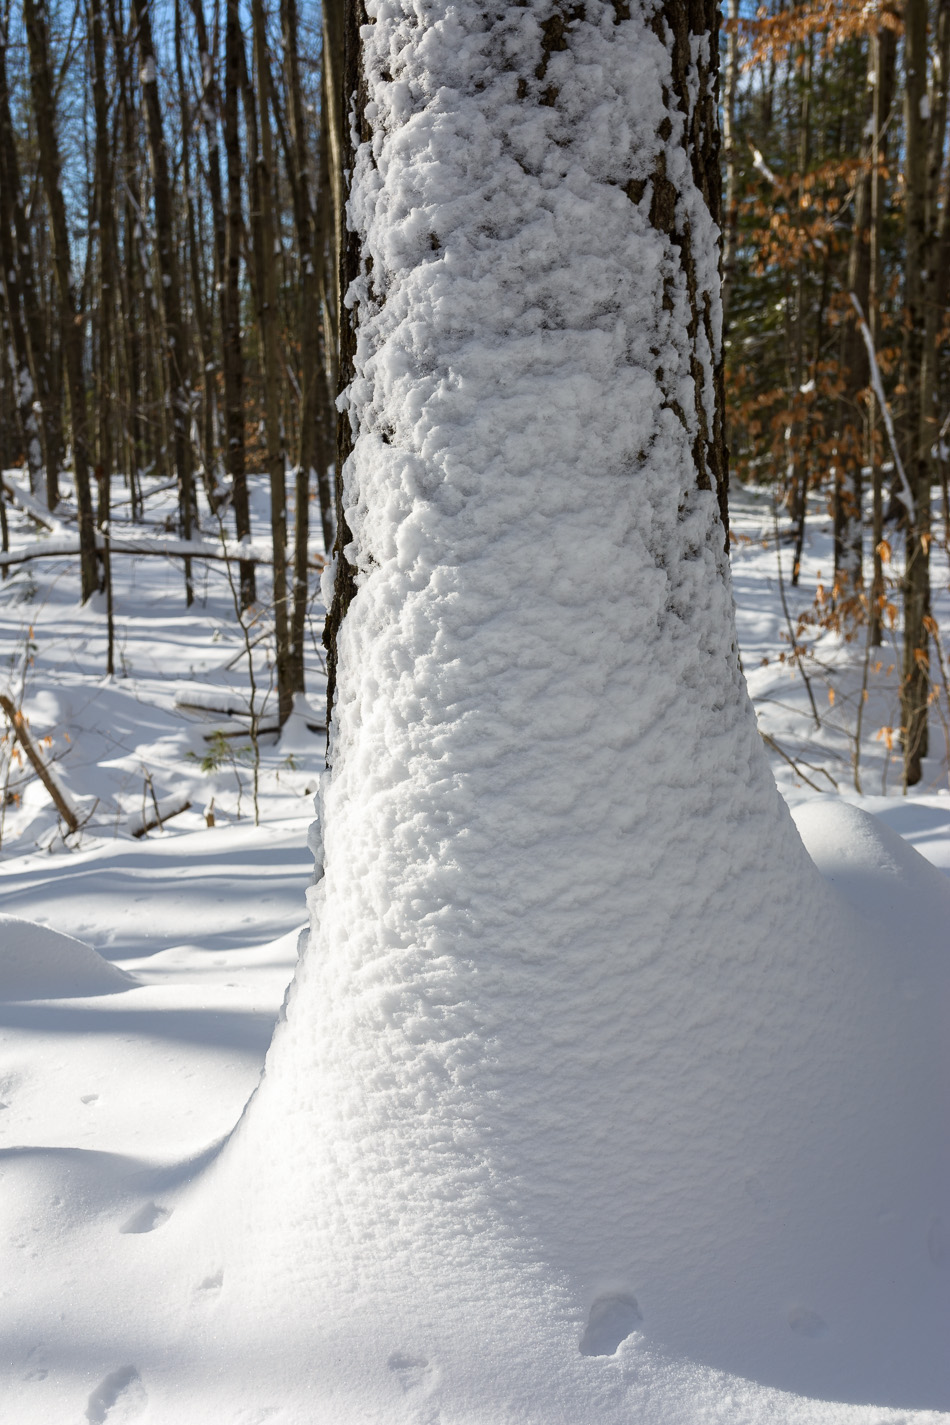 Photo of snow clinging to the bark of a tree